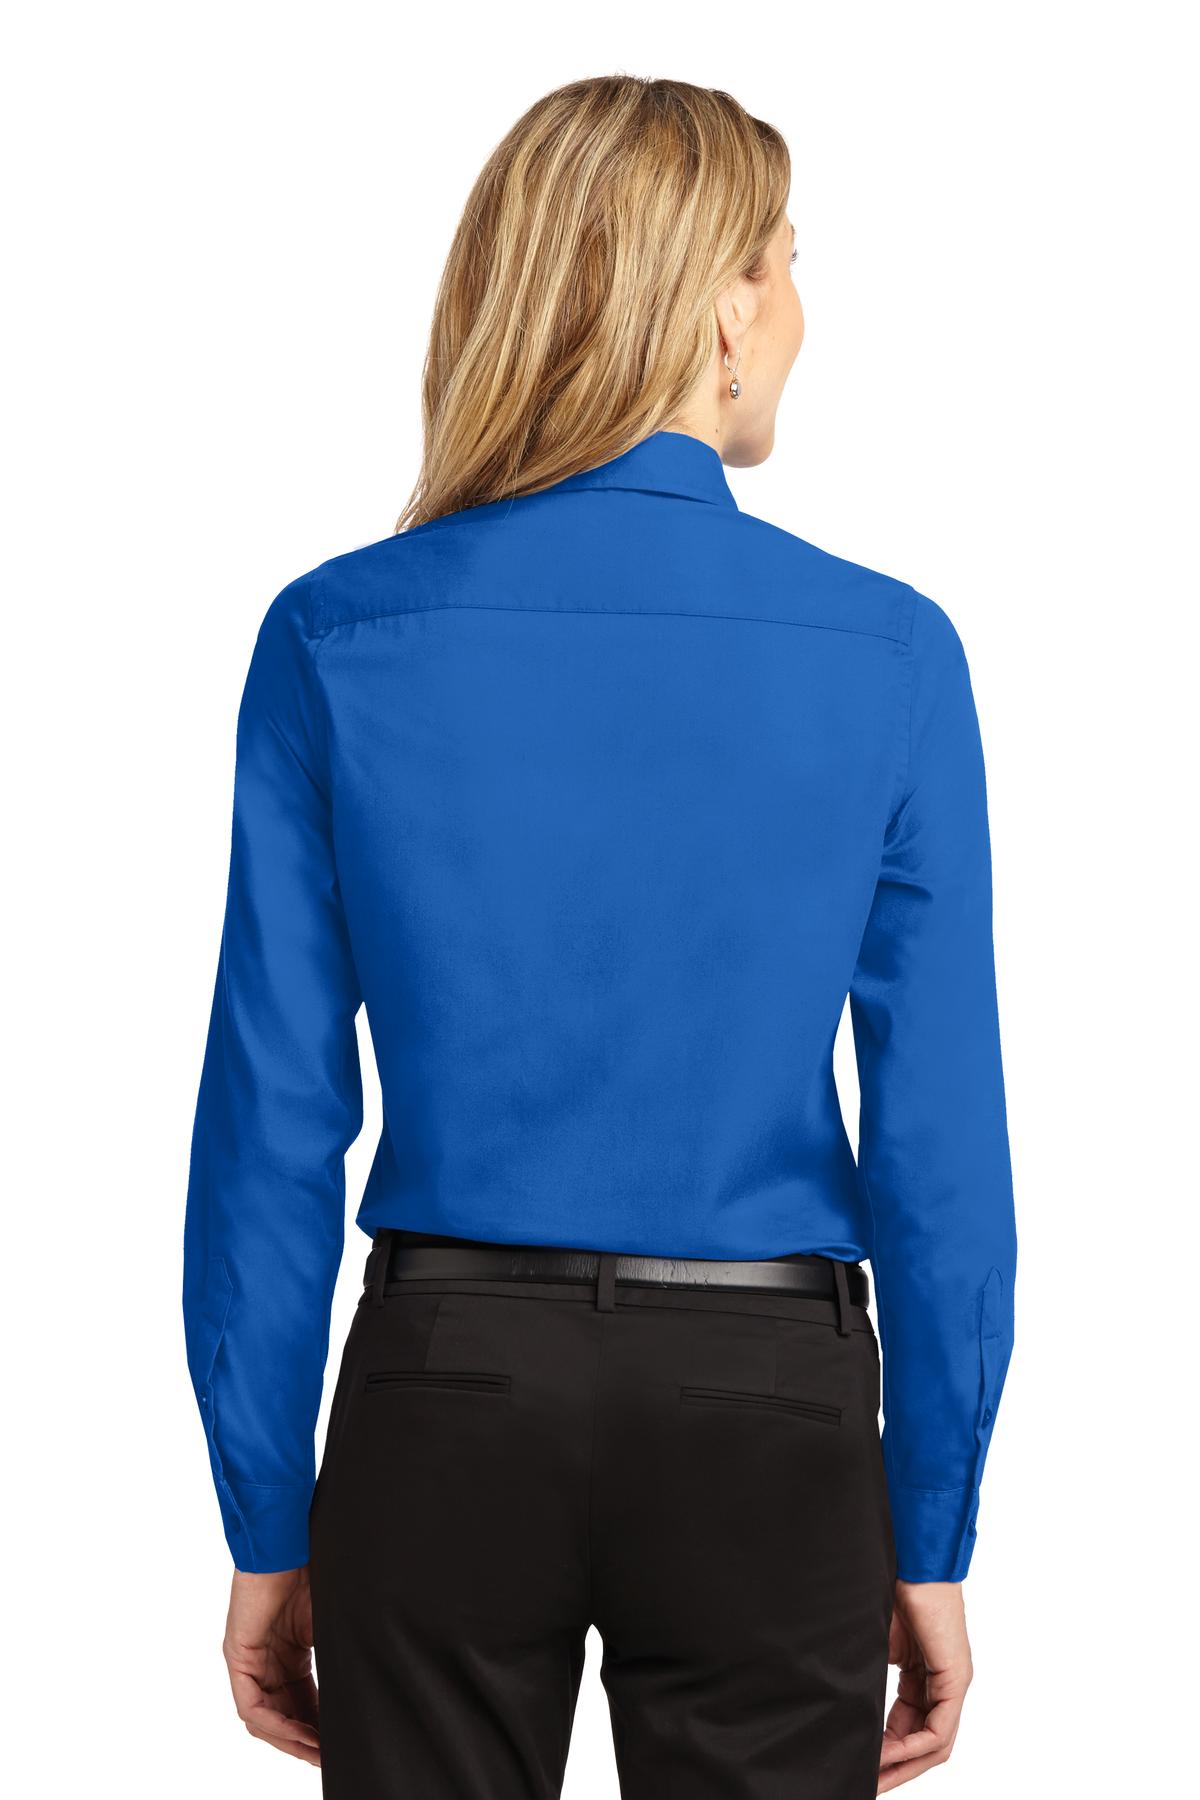 Port Authority® Ladies Long Sleeve Easy Care Shirt. L608 [Strong Blue] - DFW Impression